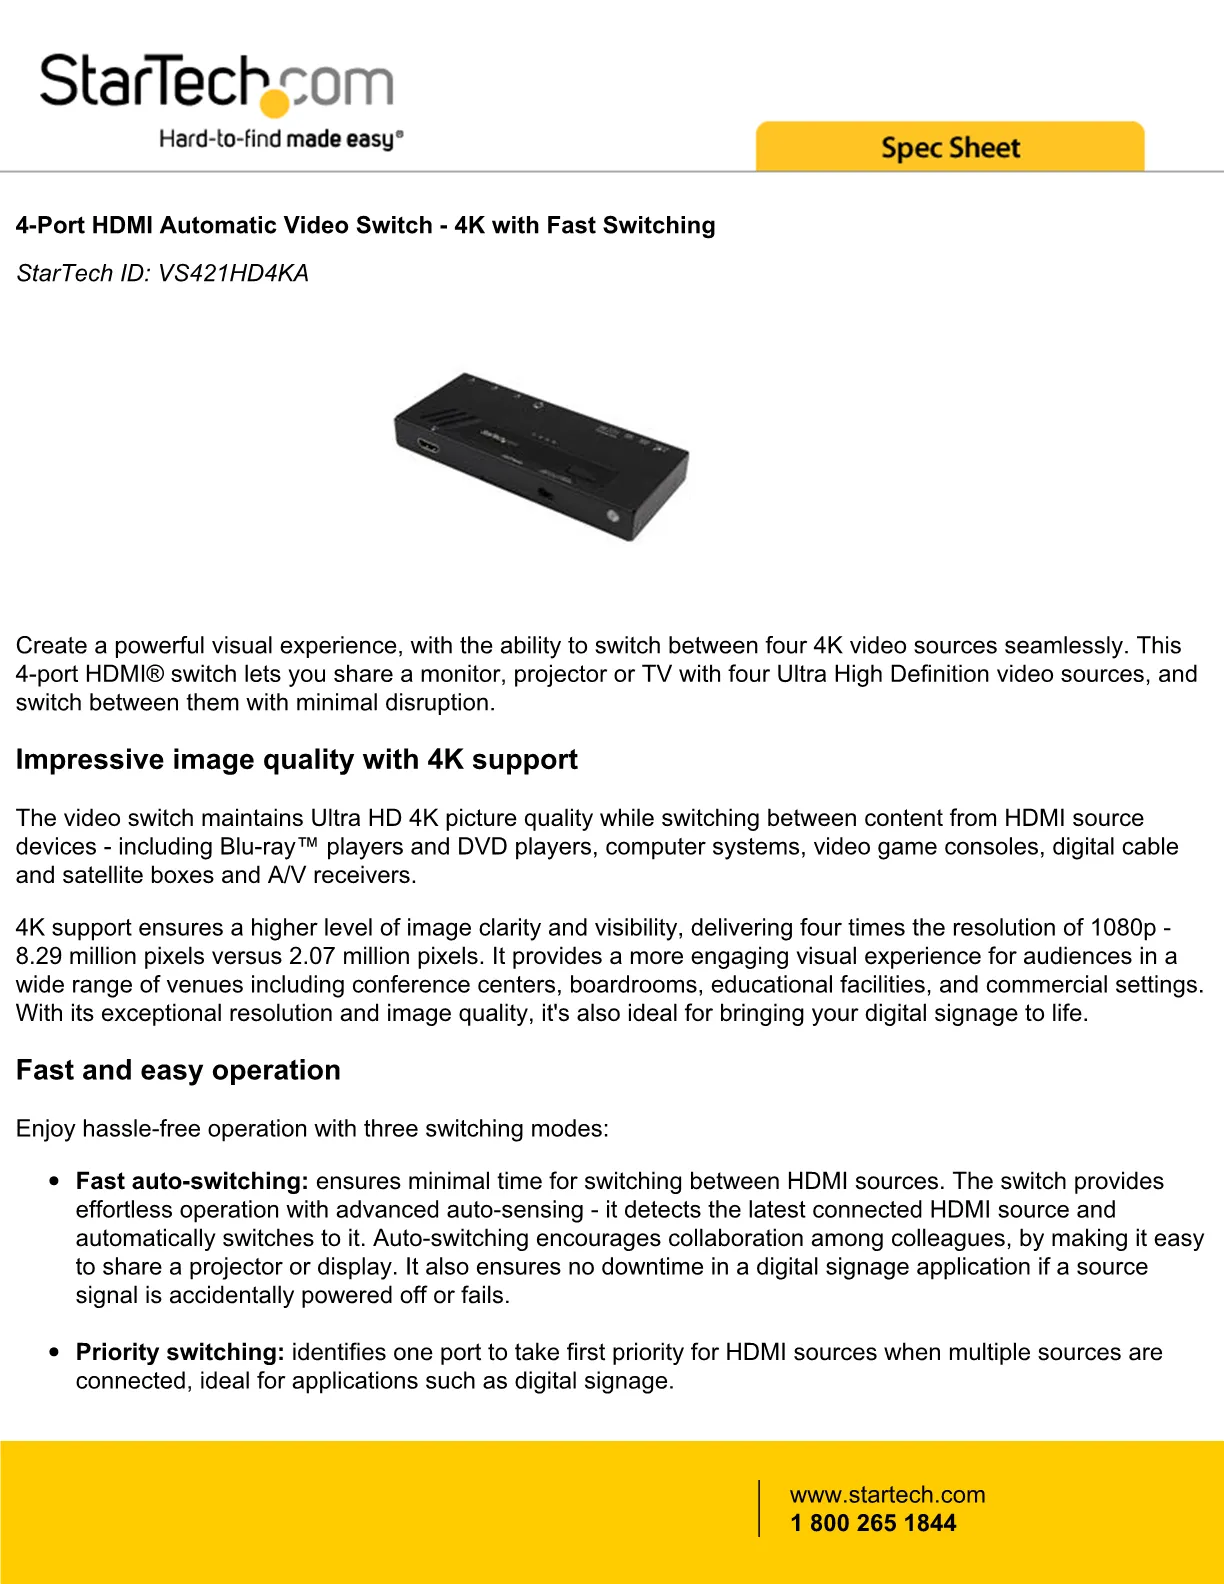 HDMI Auto Switch - Why Spend more? 